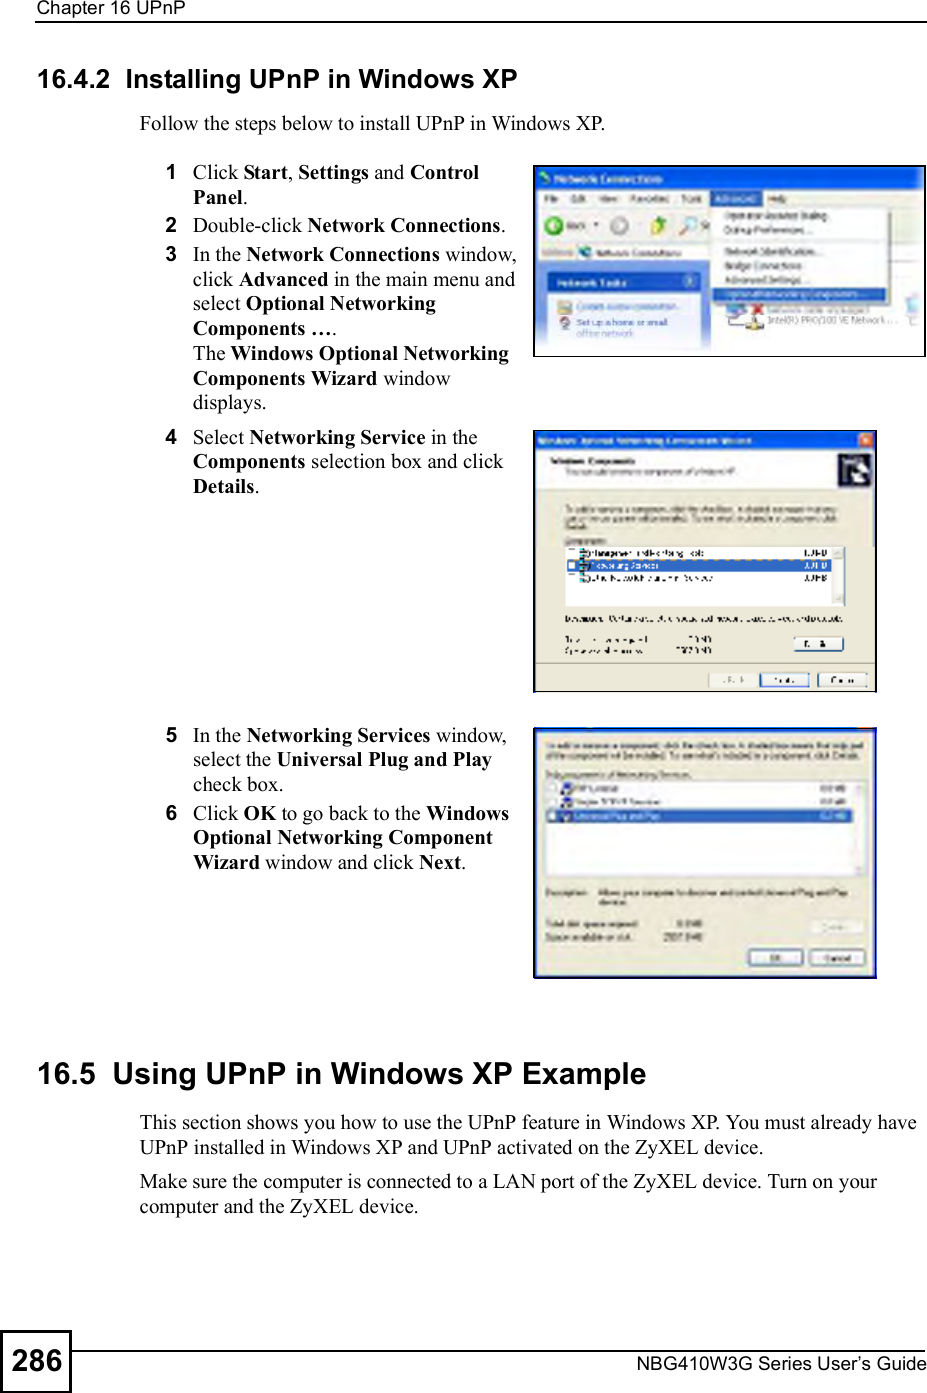 Chapter 16UPnPNBG410W3G Series User s Guide28616.4.2  Installing UPnP in Windows XPFollow the steps below to install UPnP in Windows XP.16.5  Using UPnP in Windows XP ExampleThis section shows you how to use the UPnP feature in Windows XP. You must already have UPnP installed in Windows XP and UPnP activated on the ZyXEL device.Make sure the computer is connected to a LAN port of the ZyXEL device. Turn on your computer and the ZyXEL device. 1Click Start, Settings and Control Panel. 2Double-click Network Connections.3In the Network Connections window, click Advanced in the main menu and select Optional Networking Components !. The Windows Optional Networking Components Wizard window displays. 4Select Networking Service in the Components selection box and click Details. 5In the Networking Services window, select the Universal Plug and Play check box. 6Click OK to go back to the Windows Optional Networking Component Wizard window and click Next. 